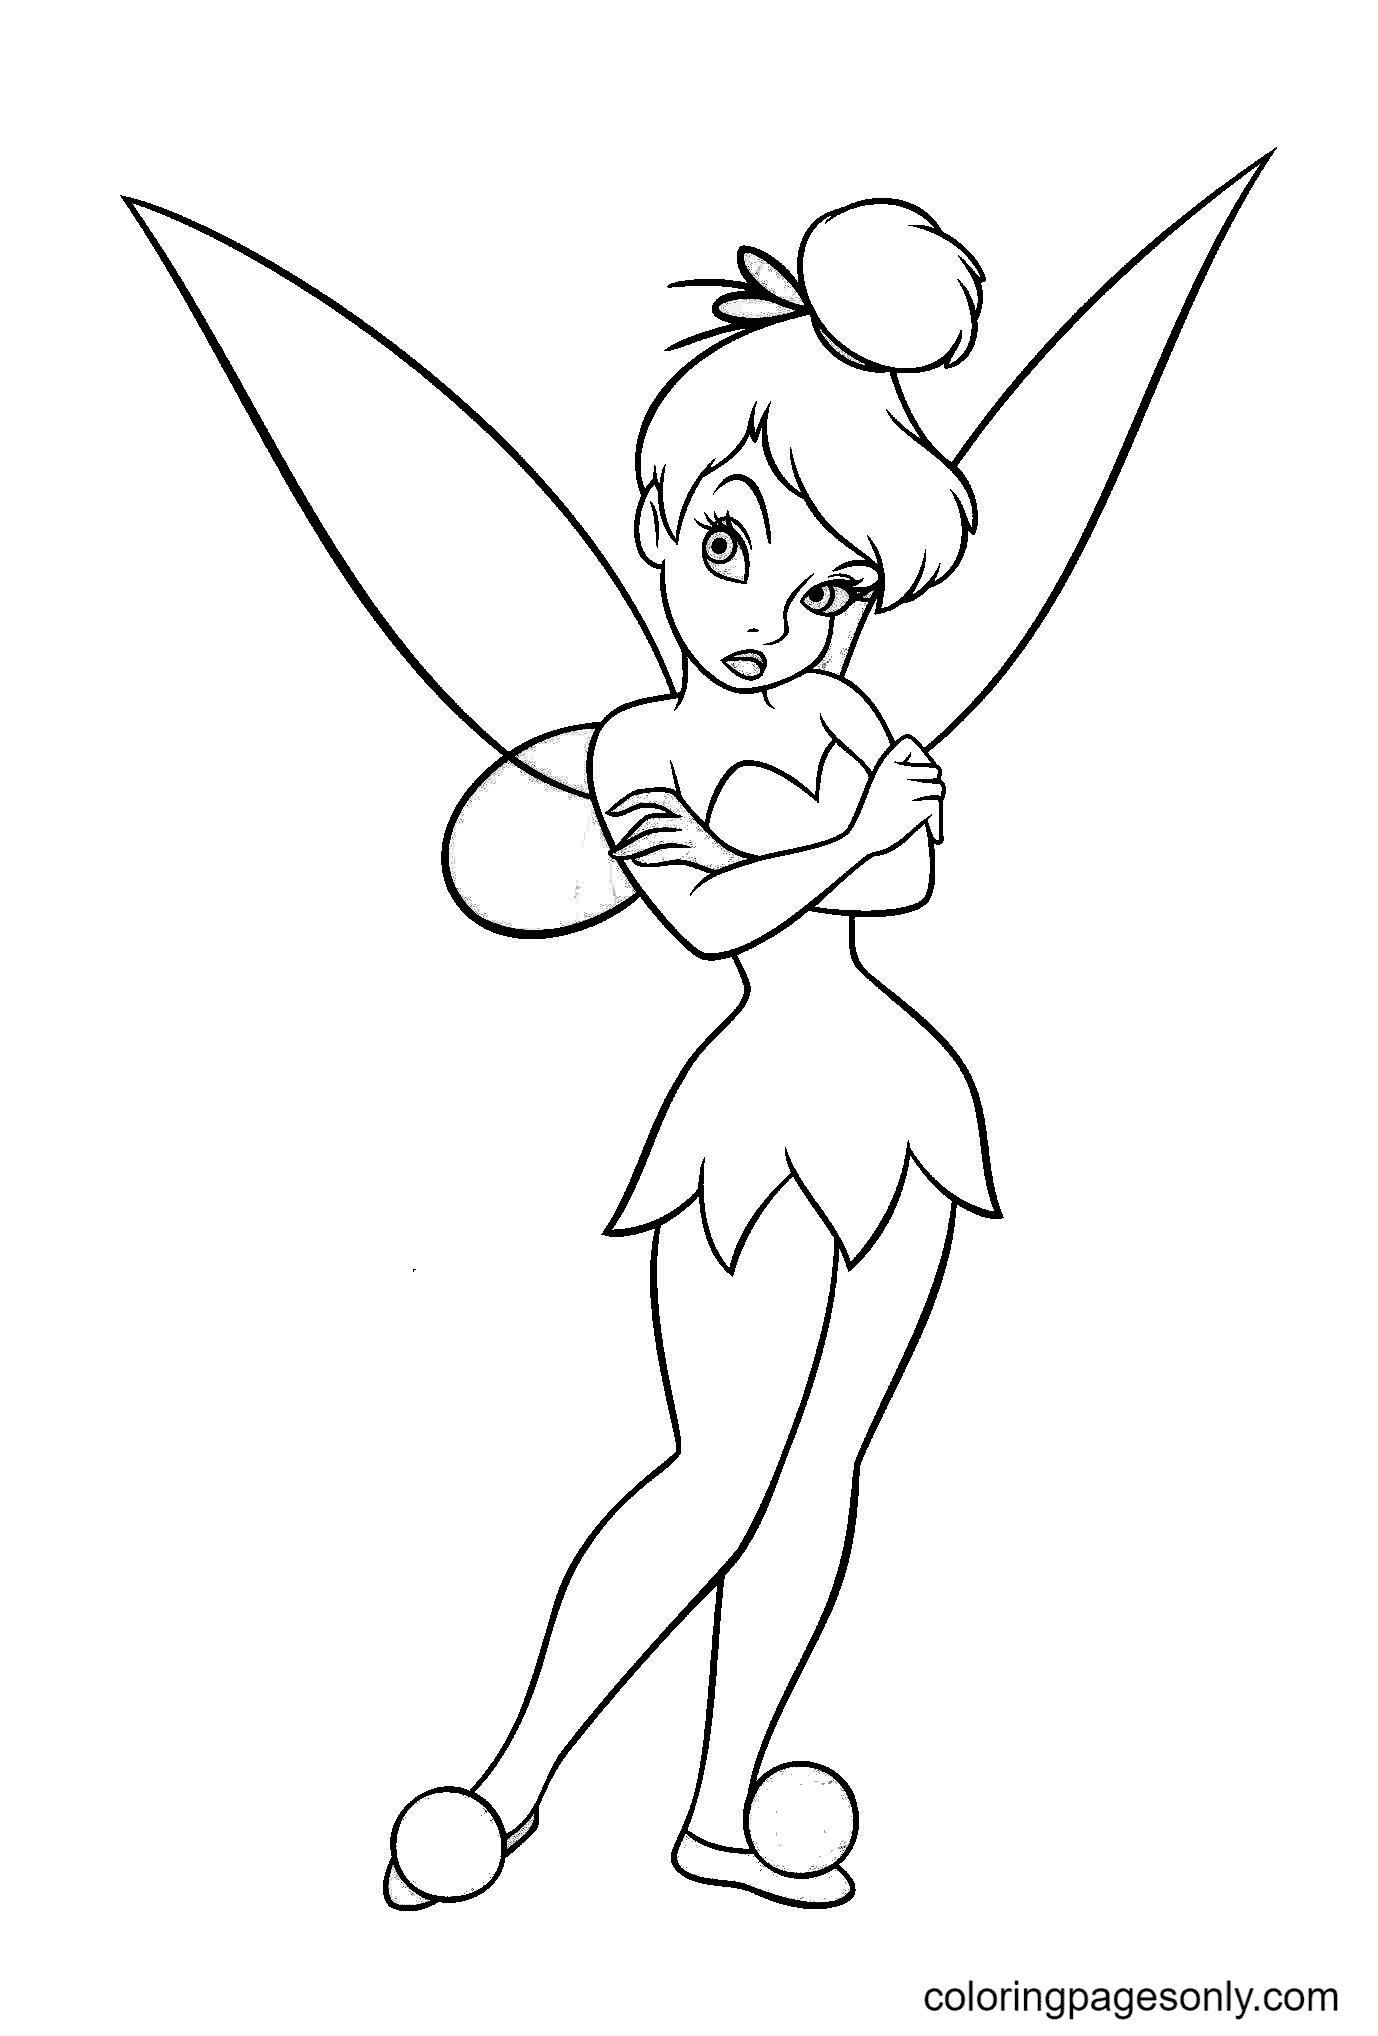 Awesome Tinkerbell Coloring Pages